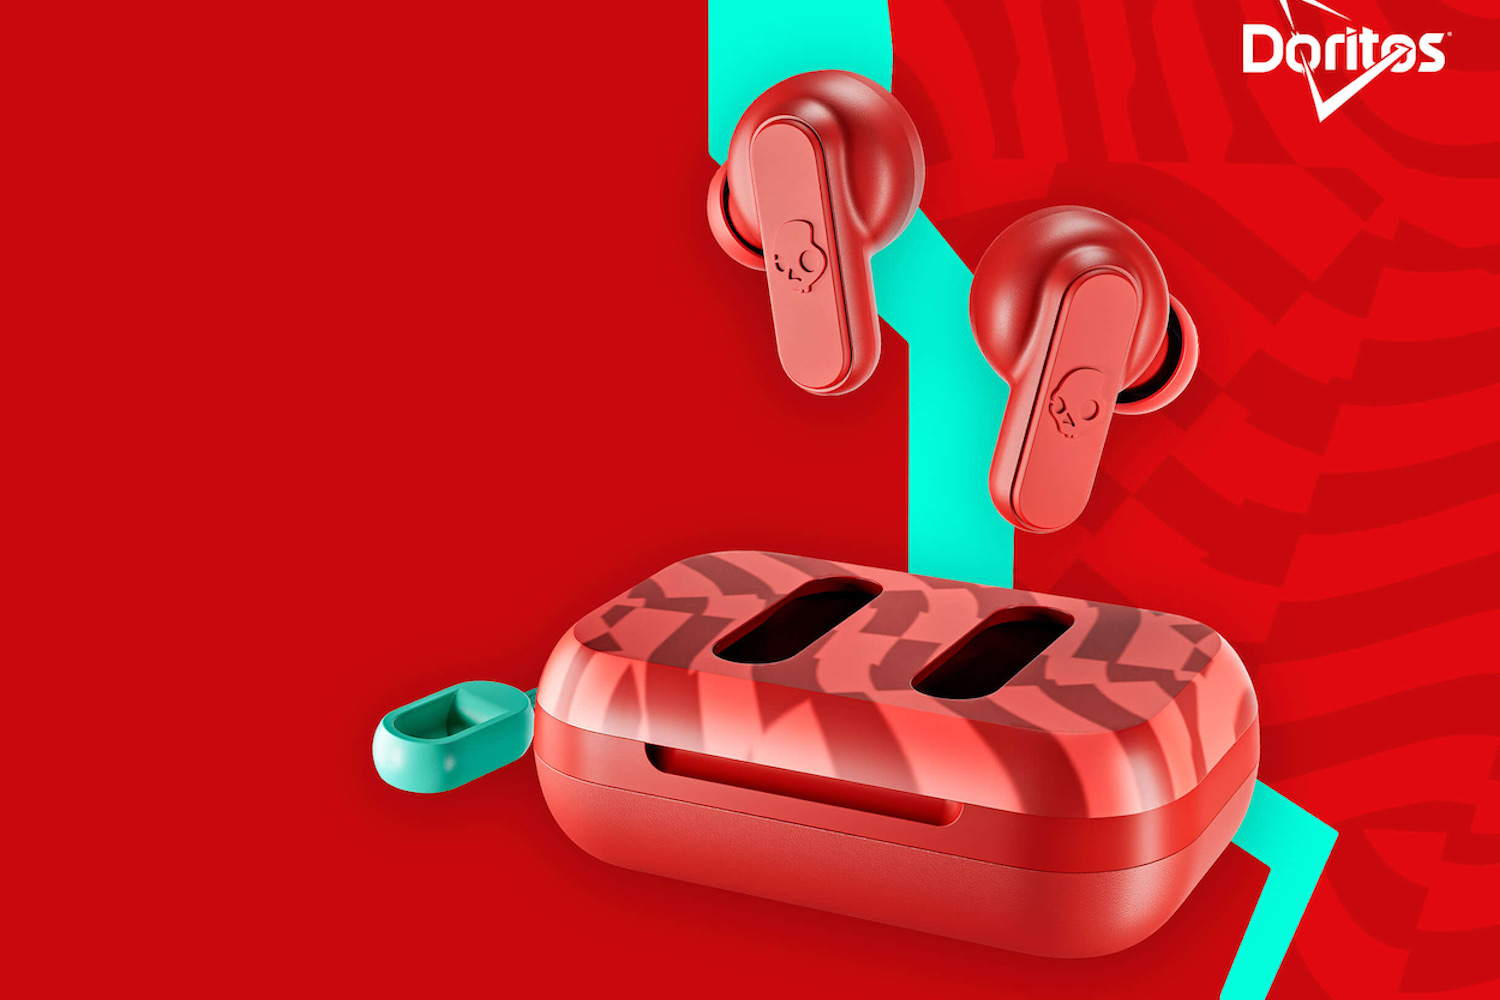 a pair of Skullcandy x Doritos headphones on a red background